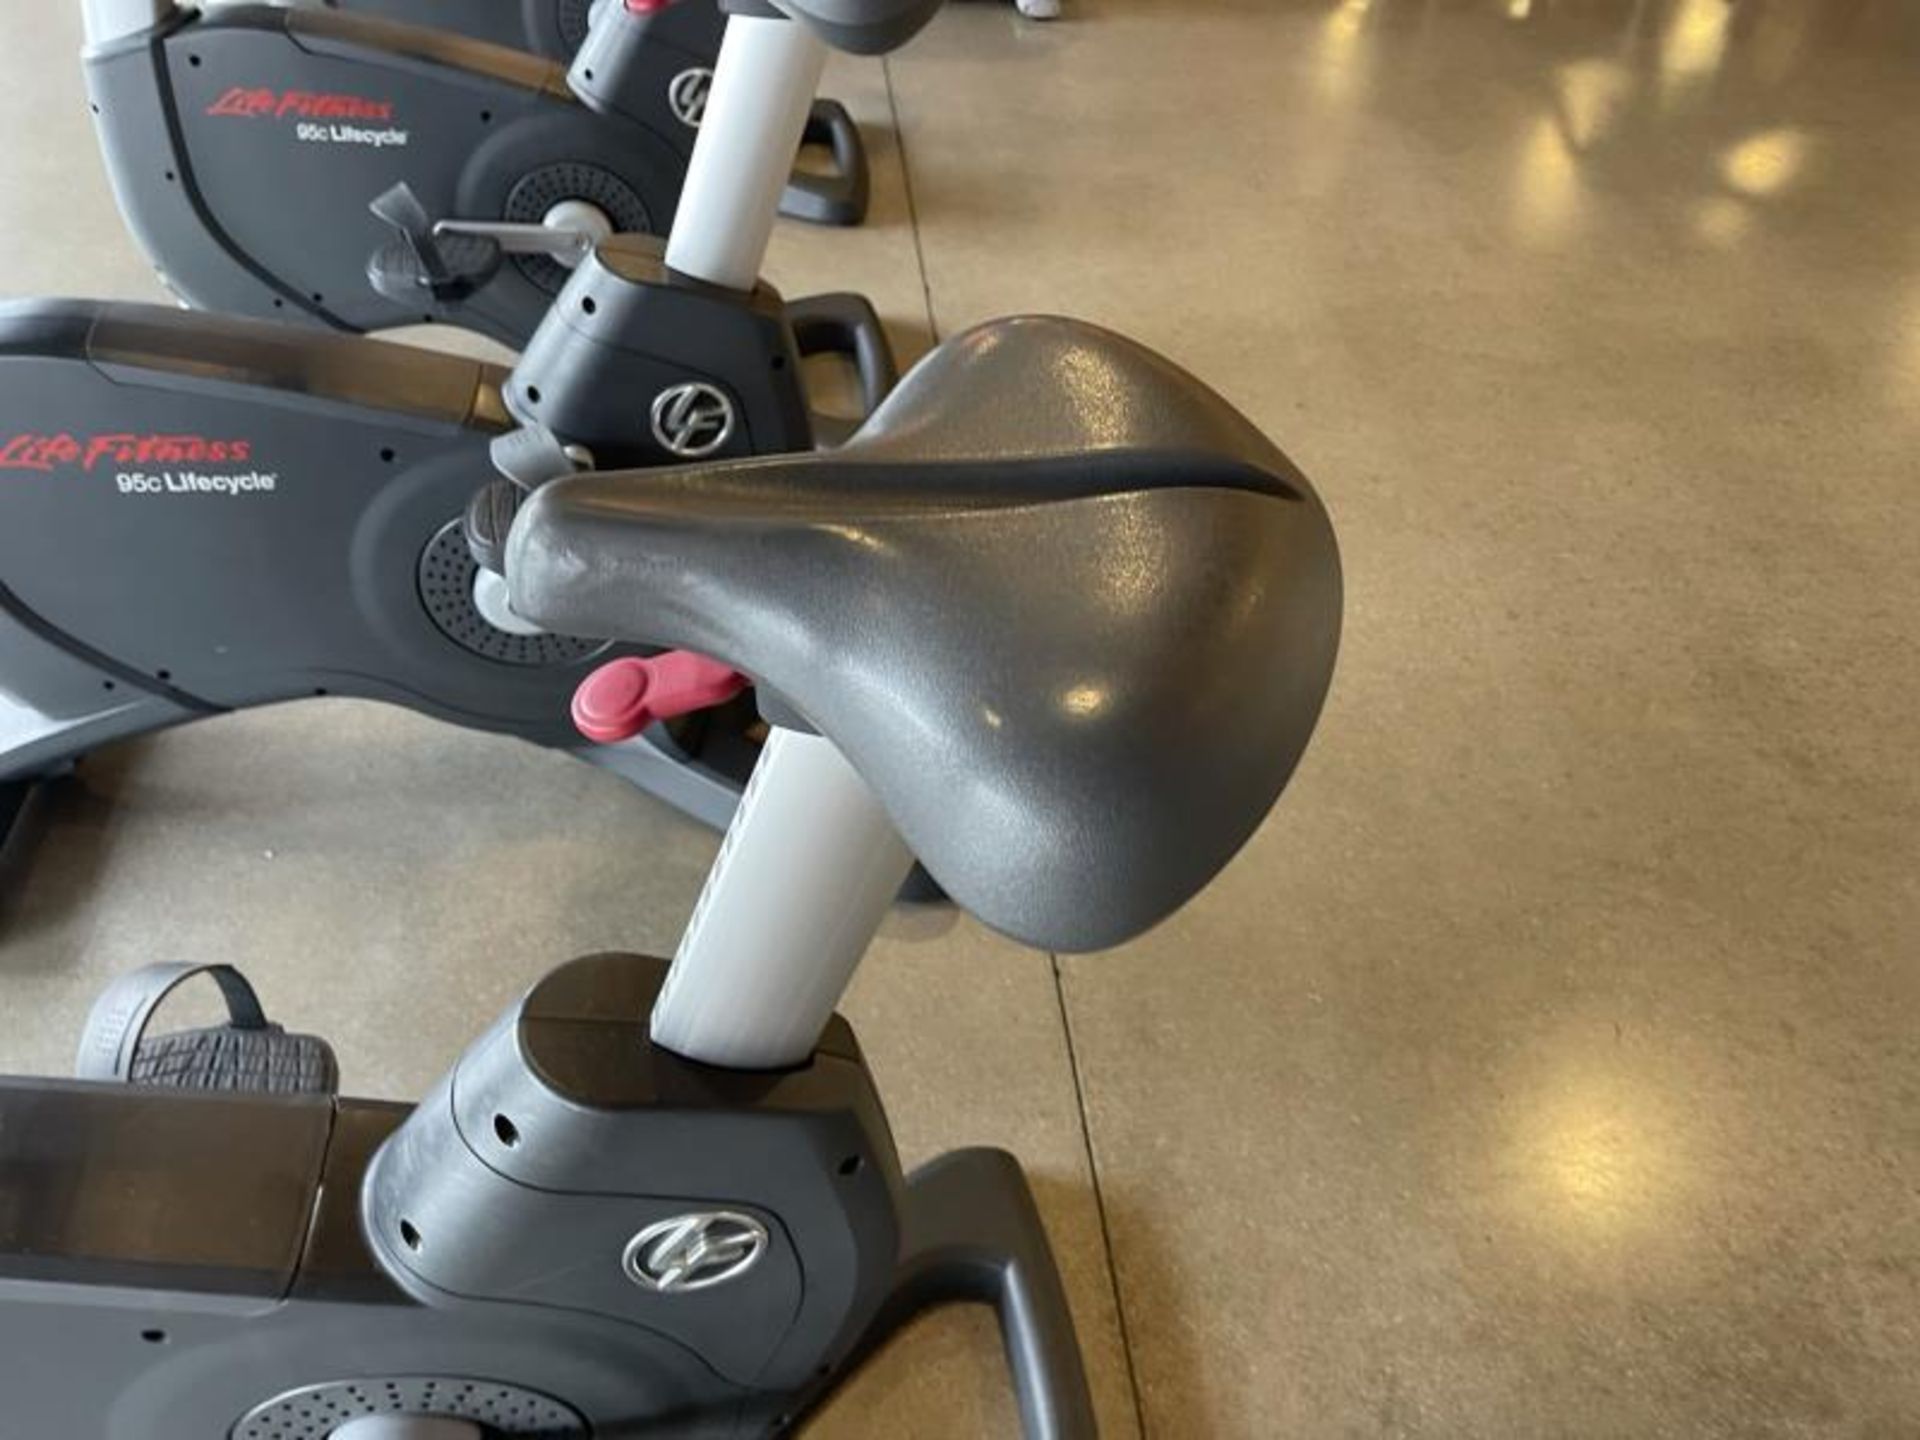 Life Fitness Exercise Bike M: 95CLifecycle, SN: CLV102819 - Image 3 of 5